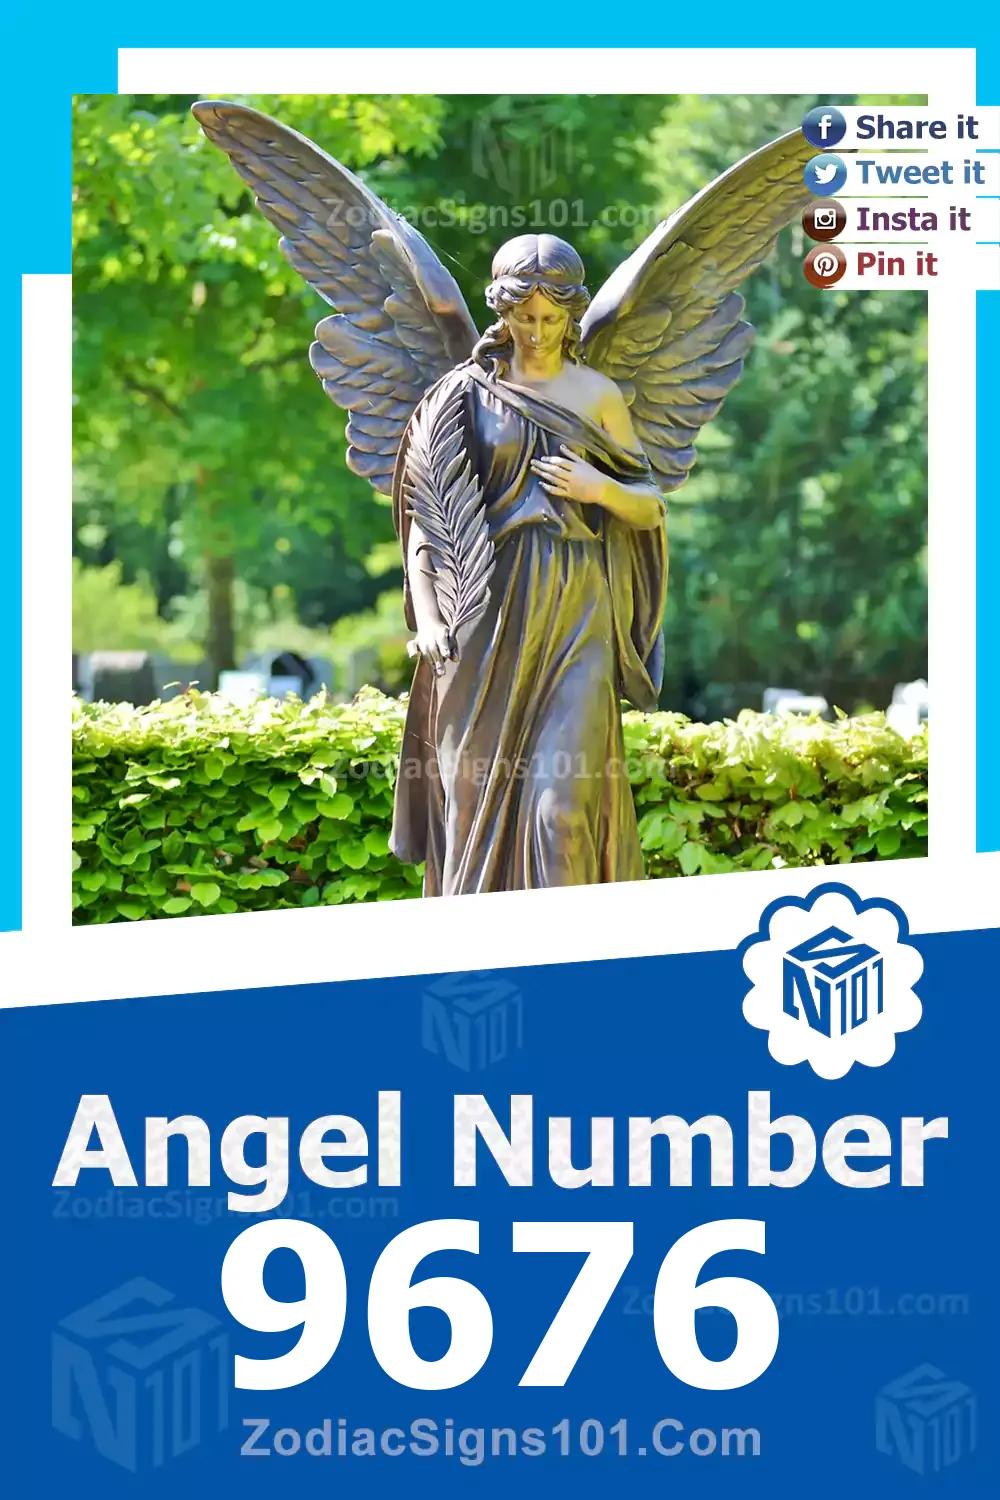 9676 Angel Number Meaning